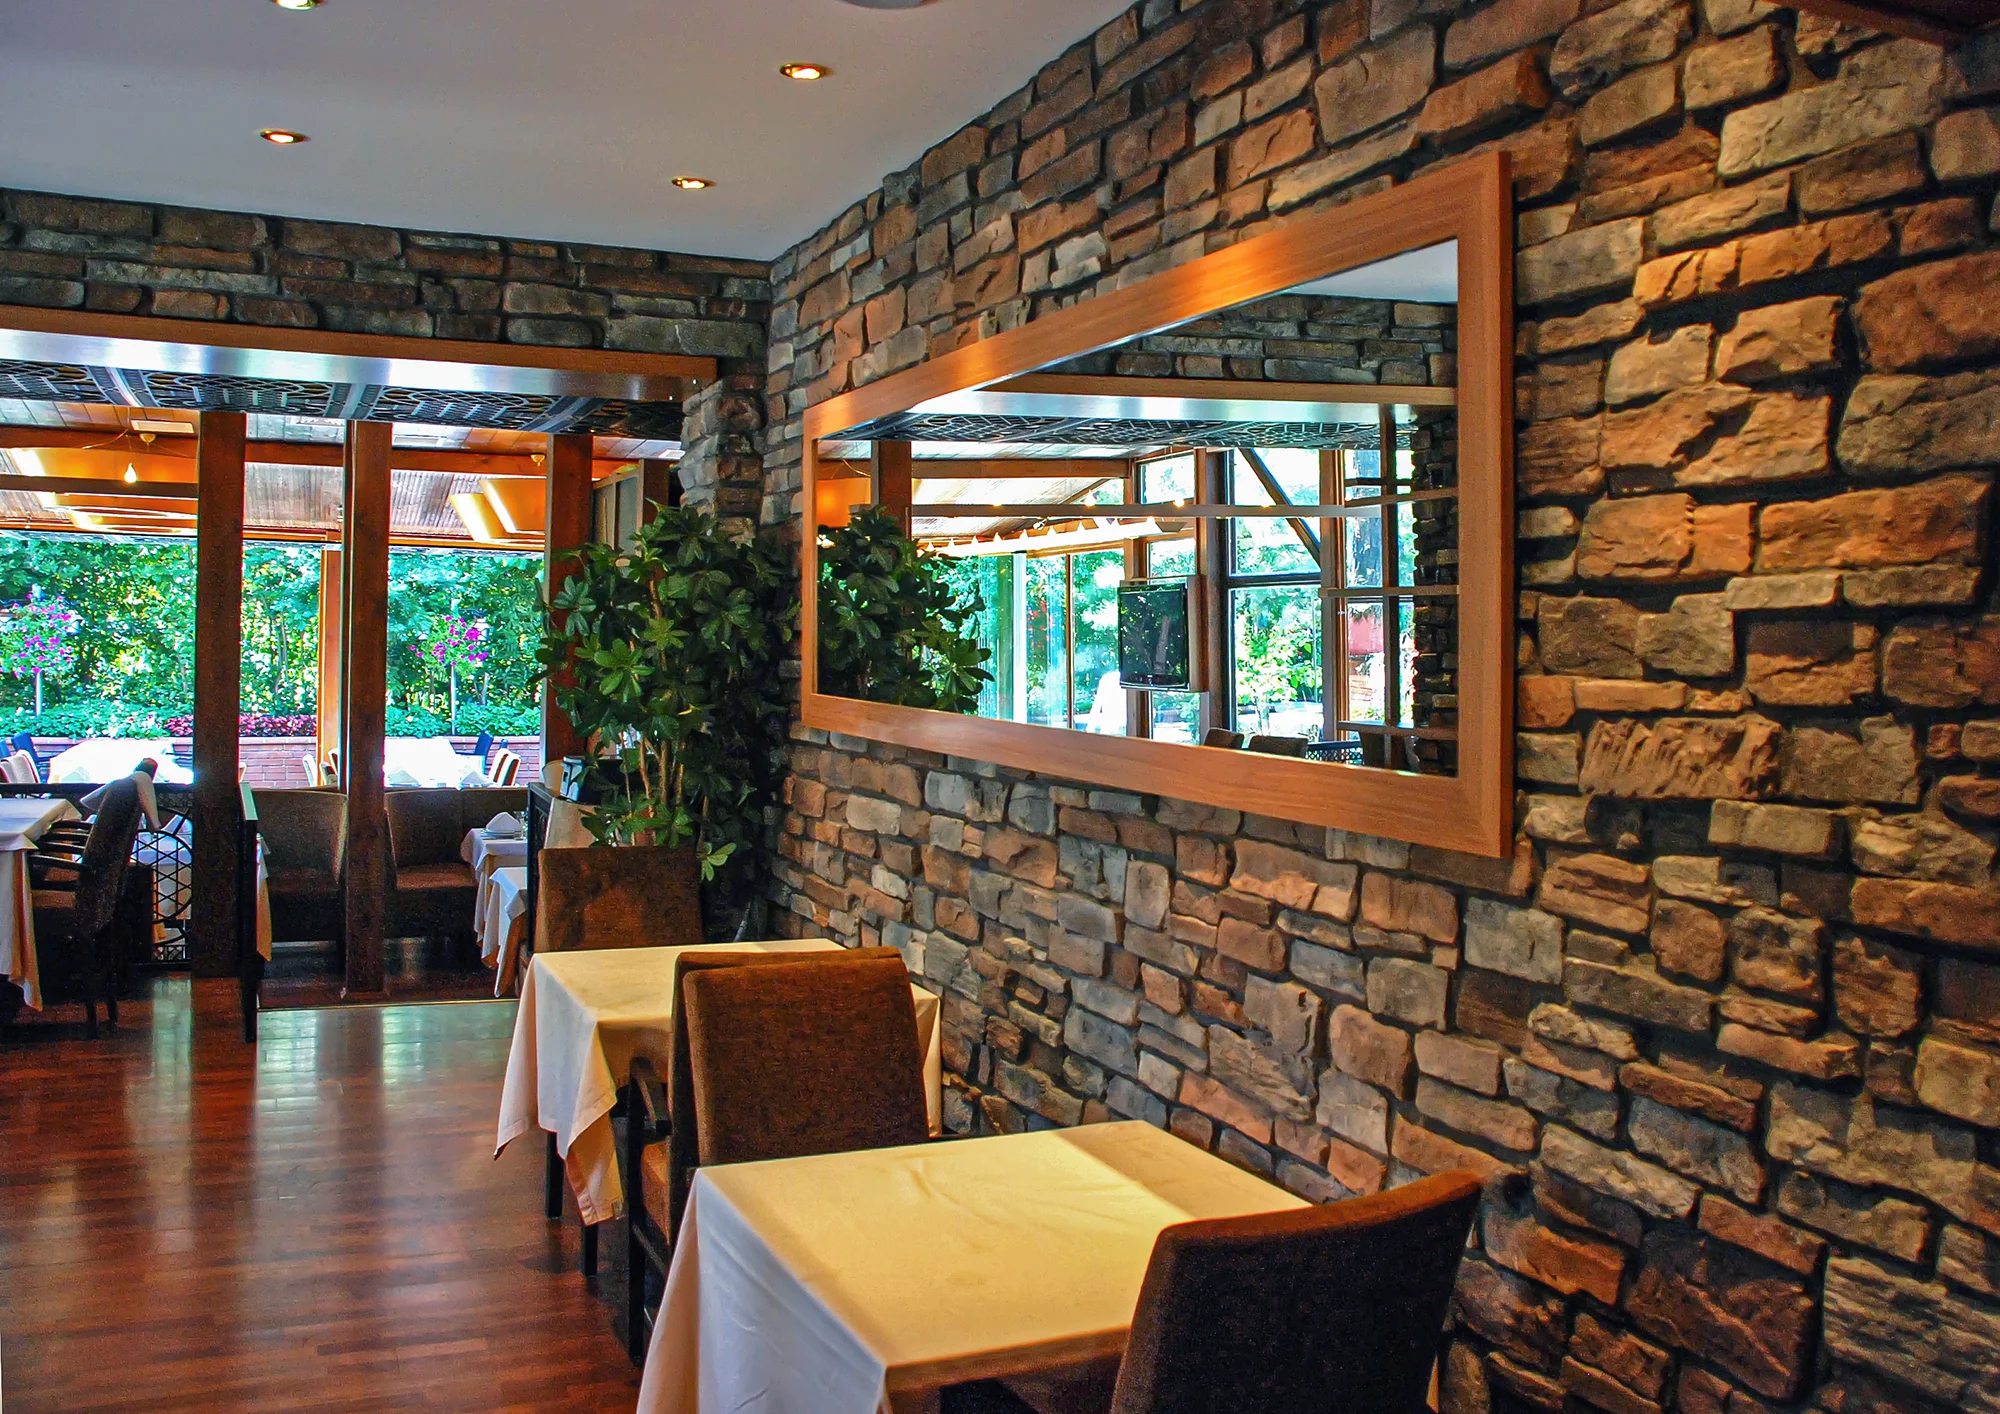 Mirror on a stone wall in a cozy restaurant